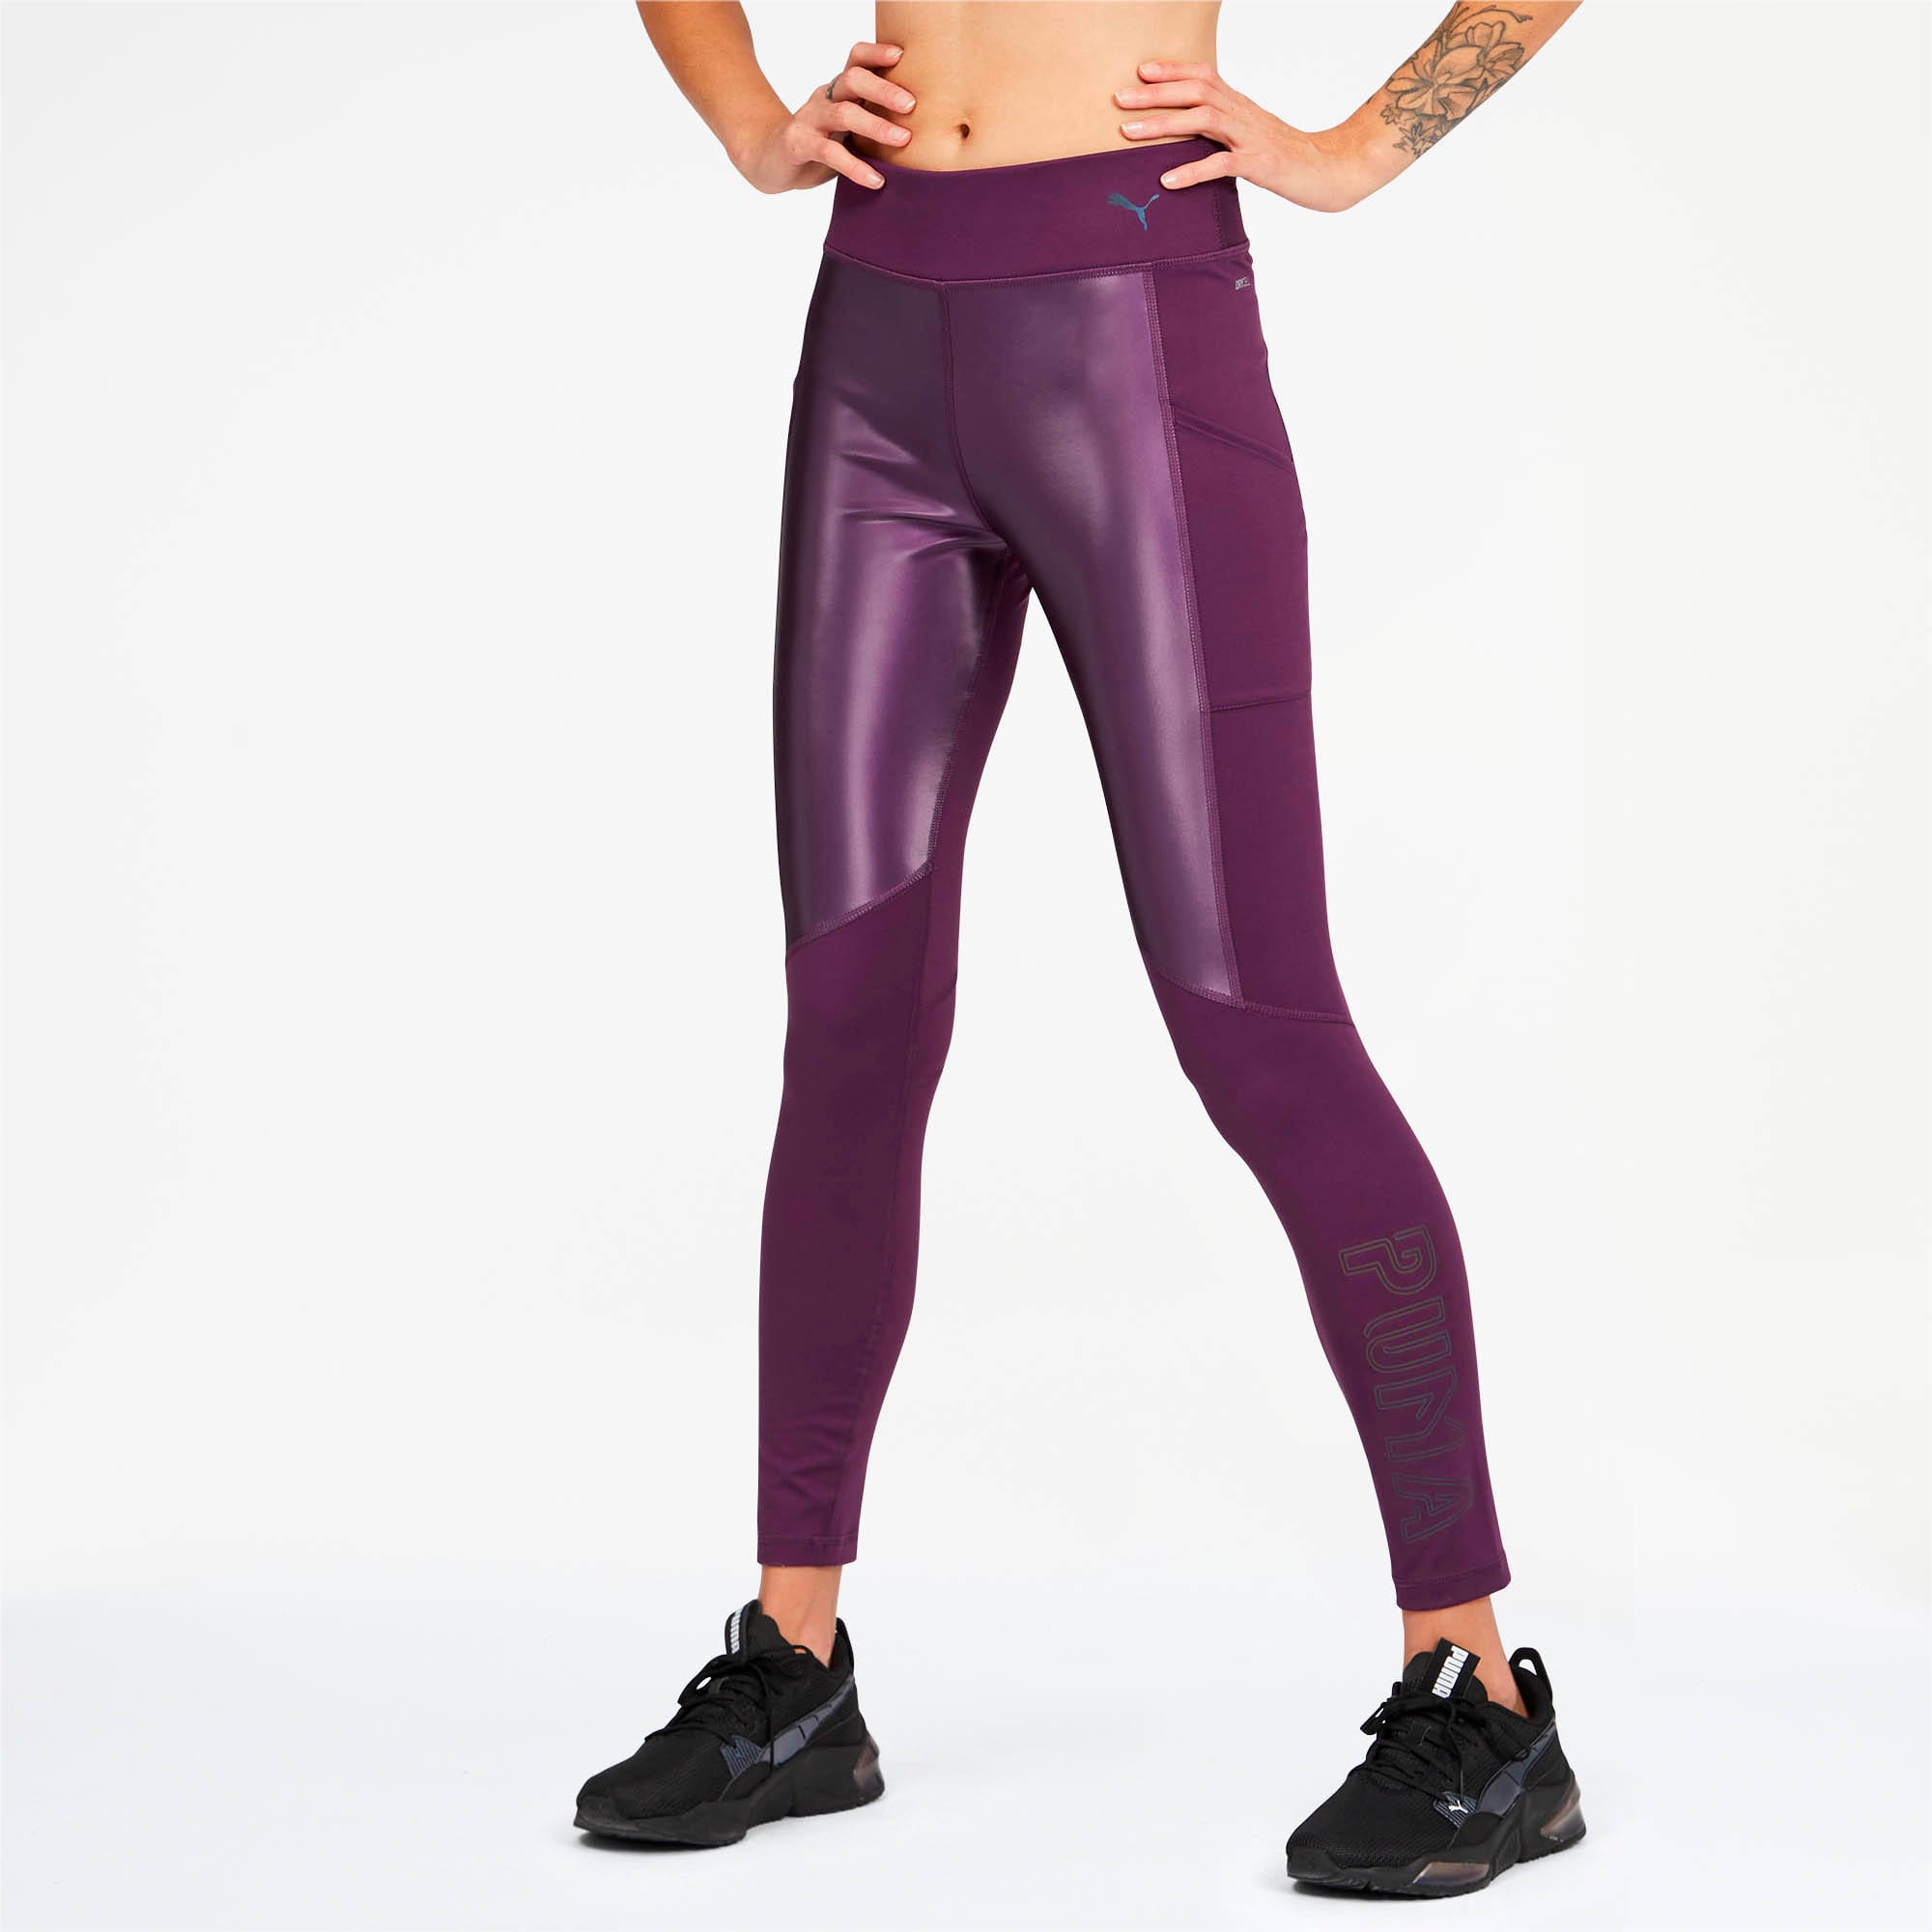 Women's Gym & Running Leggings, Fast Delivery!